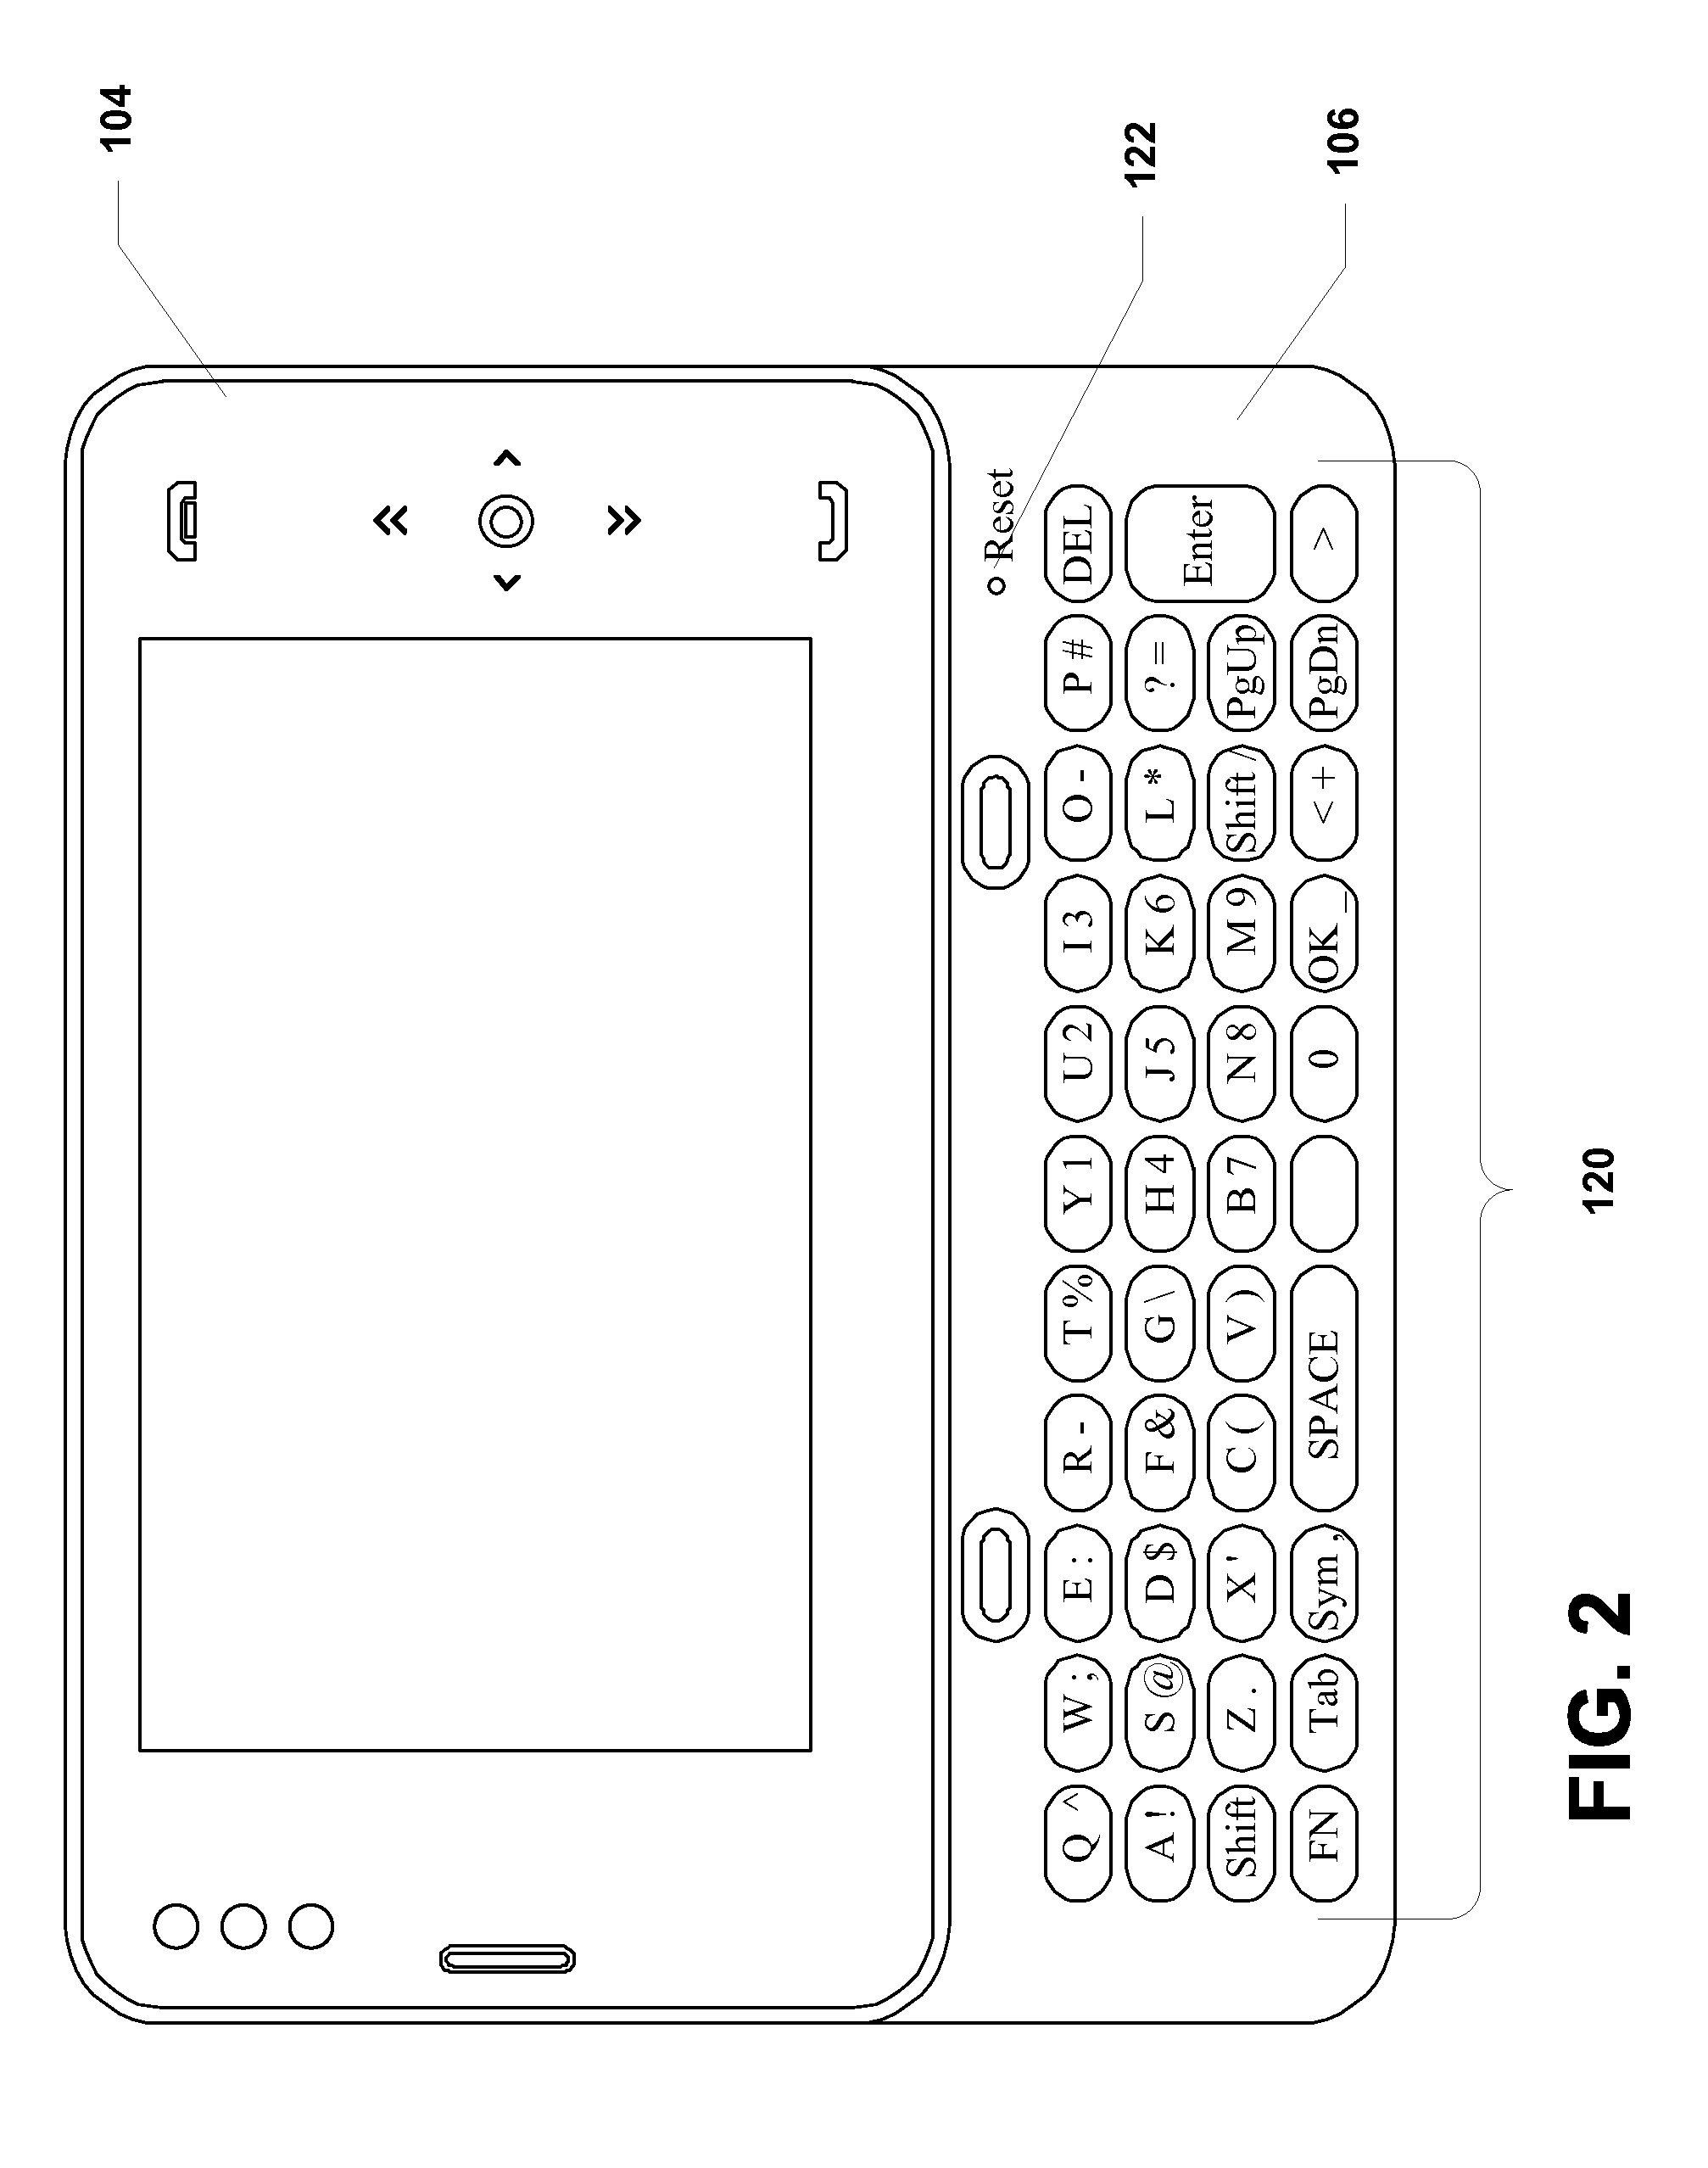 System and method of providing scalable computing between a portable computing device and a portable computing device docking station